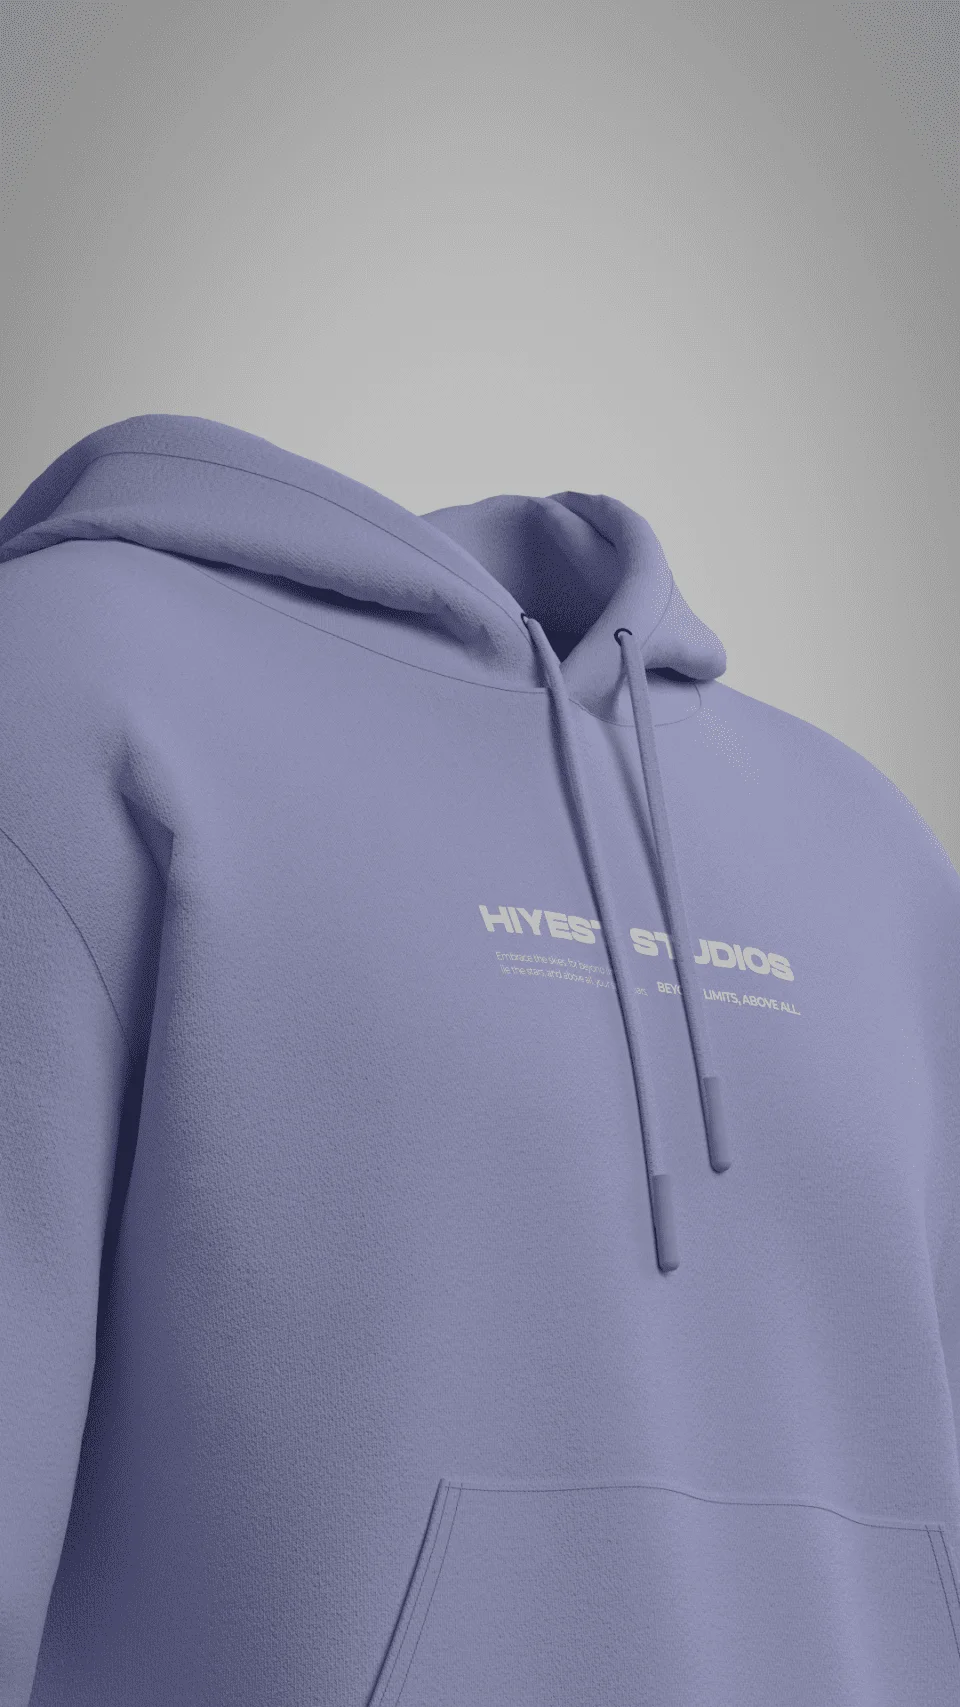 buy solid lavender category: hiyest studios, lavender category, best lavender category  online, top-rated lavender oversized hoodie on sale, category for men & women, lavender lavender category, category store near me